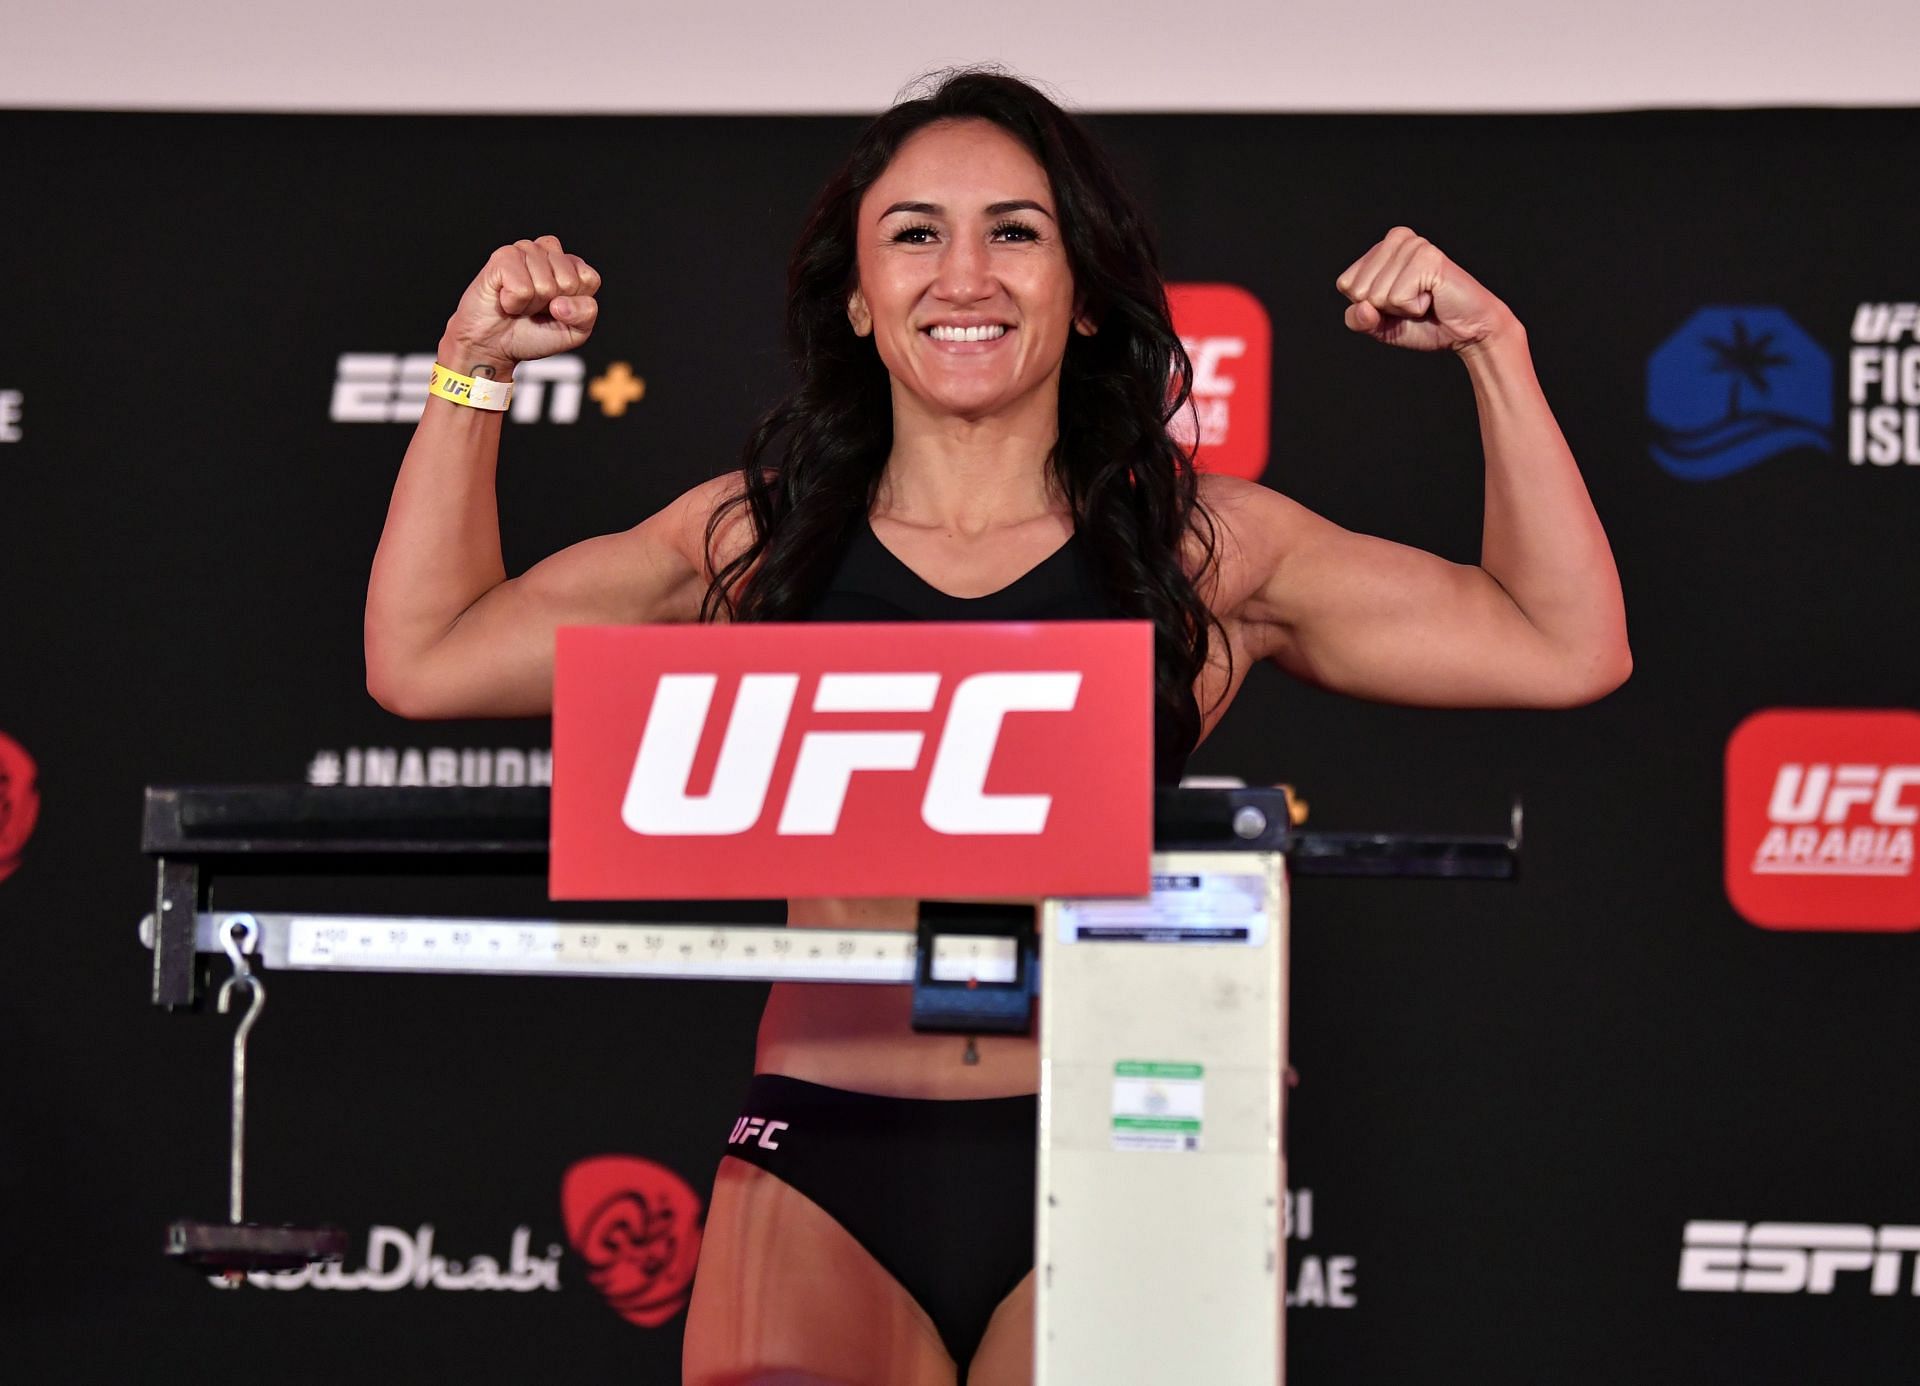 UFC Fight Night: Whittaker v Till Weigh-in: Carla Esparza on the scales (Image courtesy of Getty)